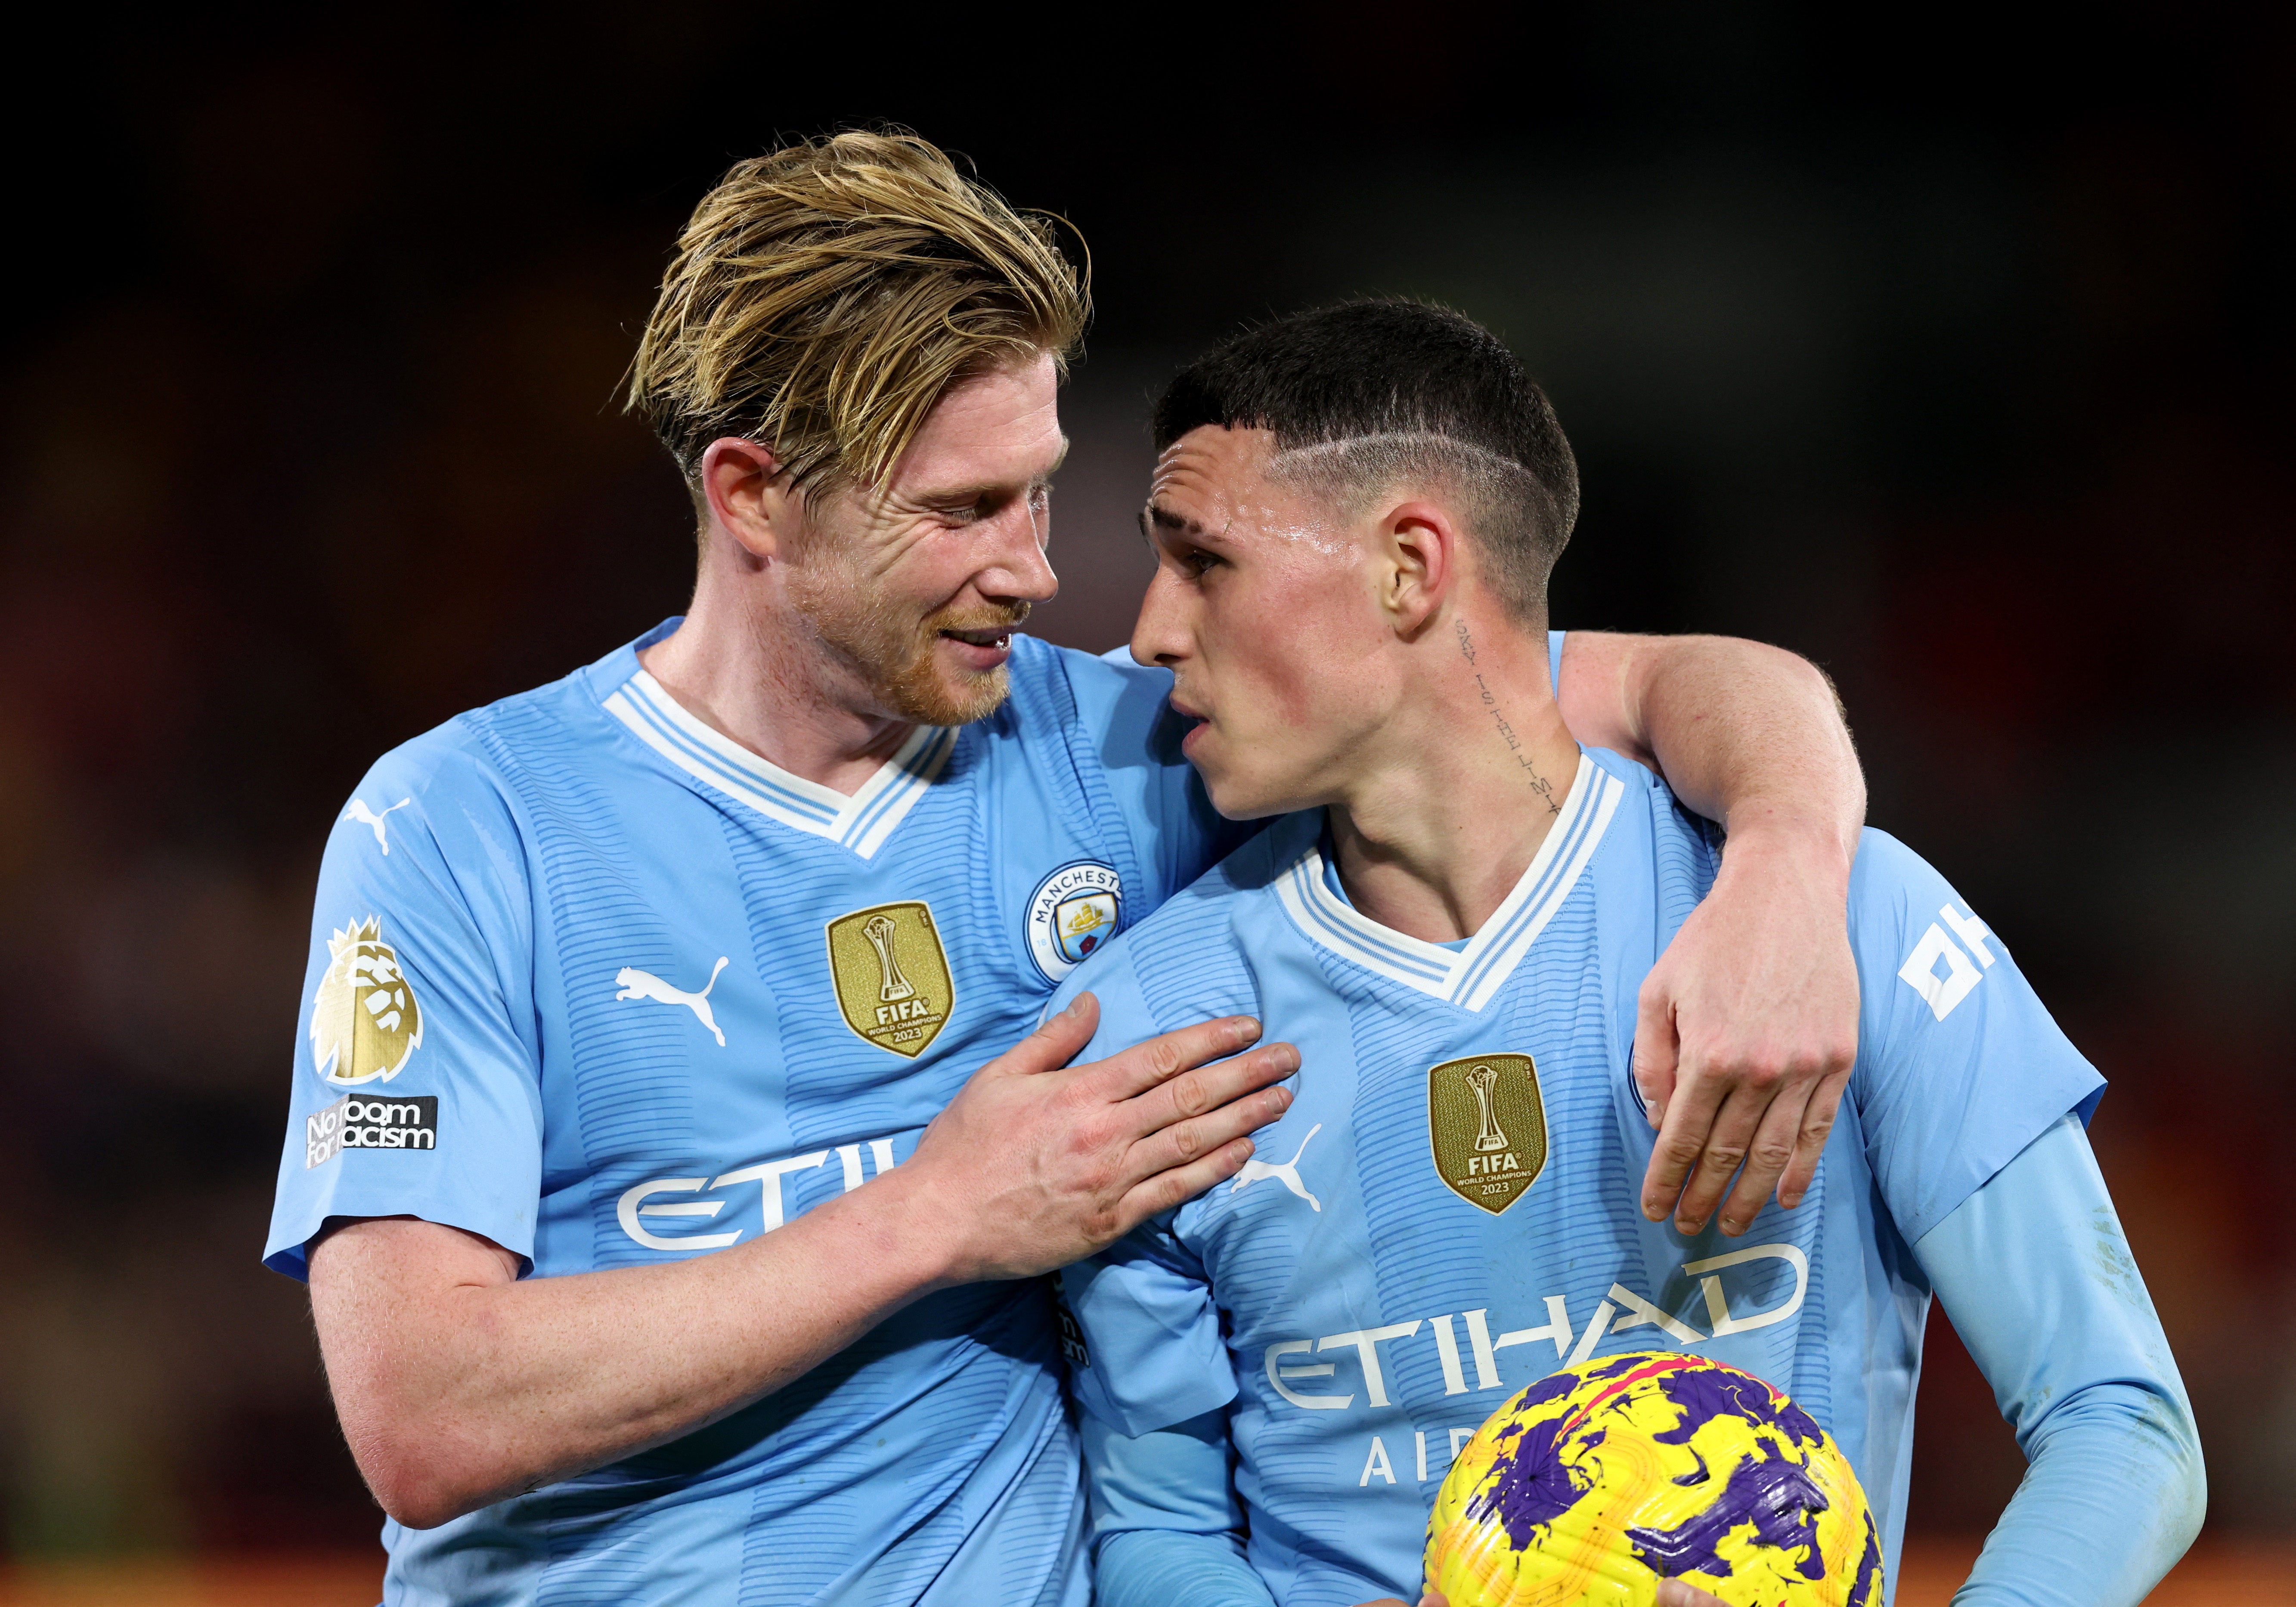 Guardiola said Foden can be the future of City’s midfield